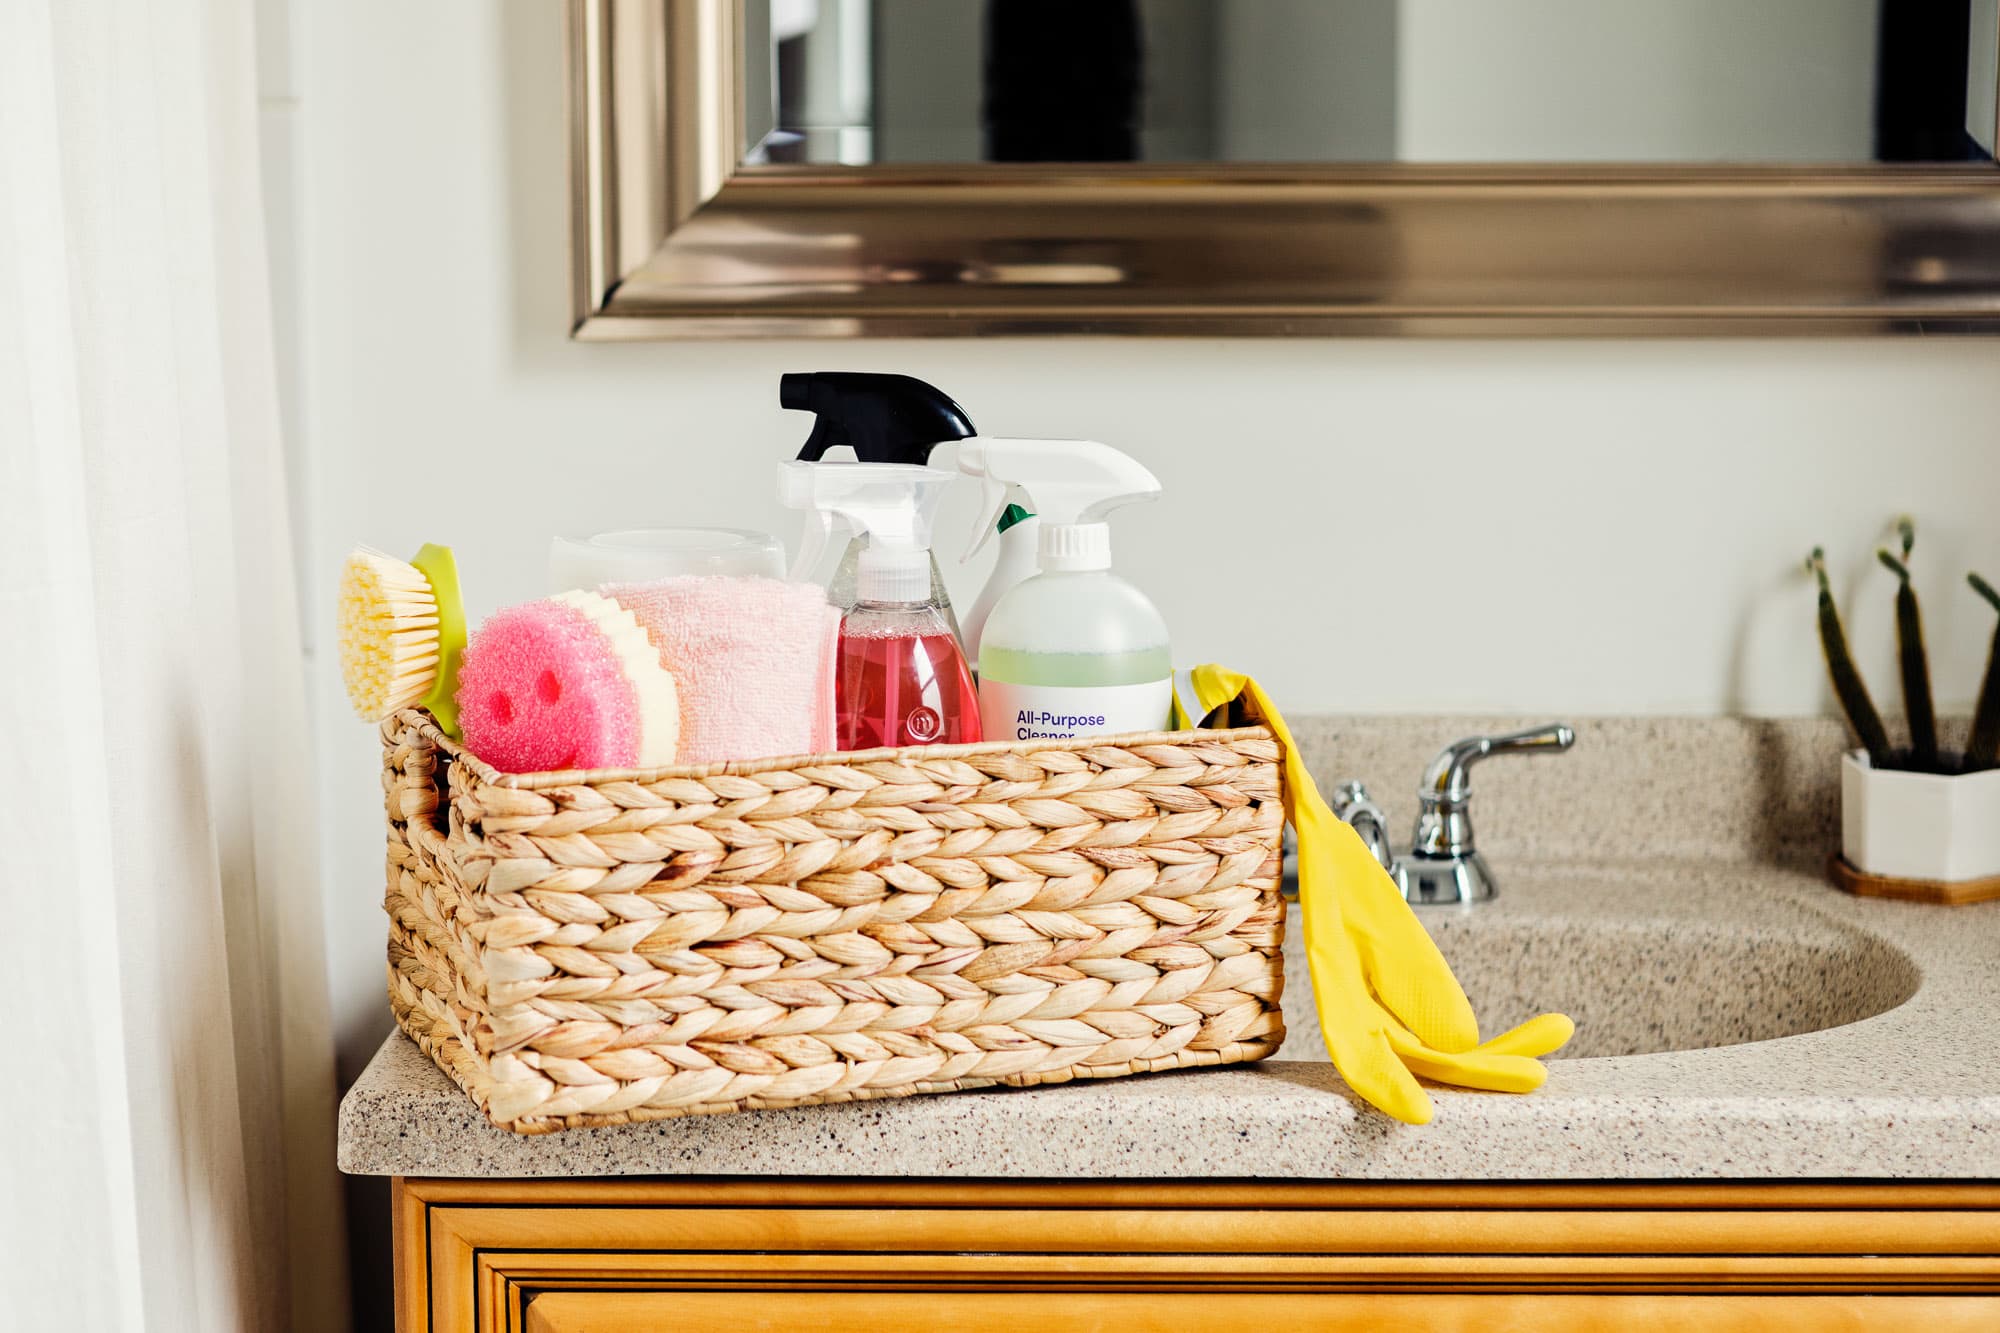 Now Is the Time to Clean Your Cleaning Supplies